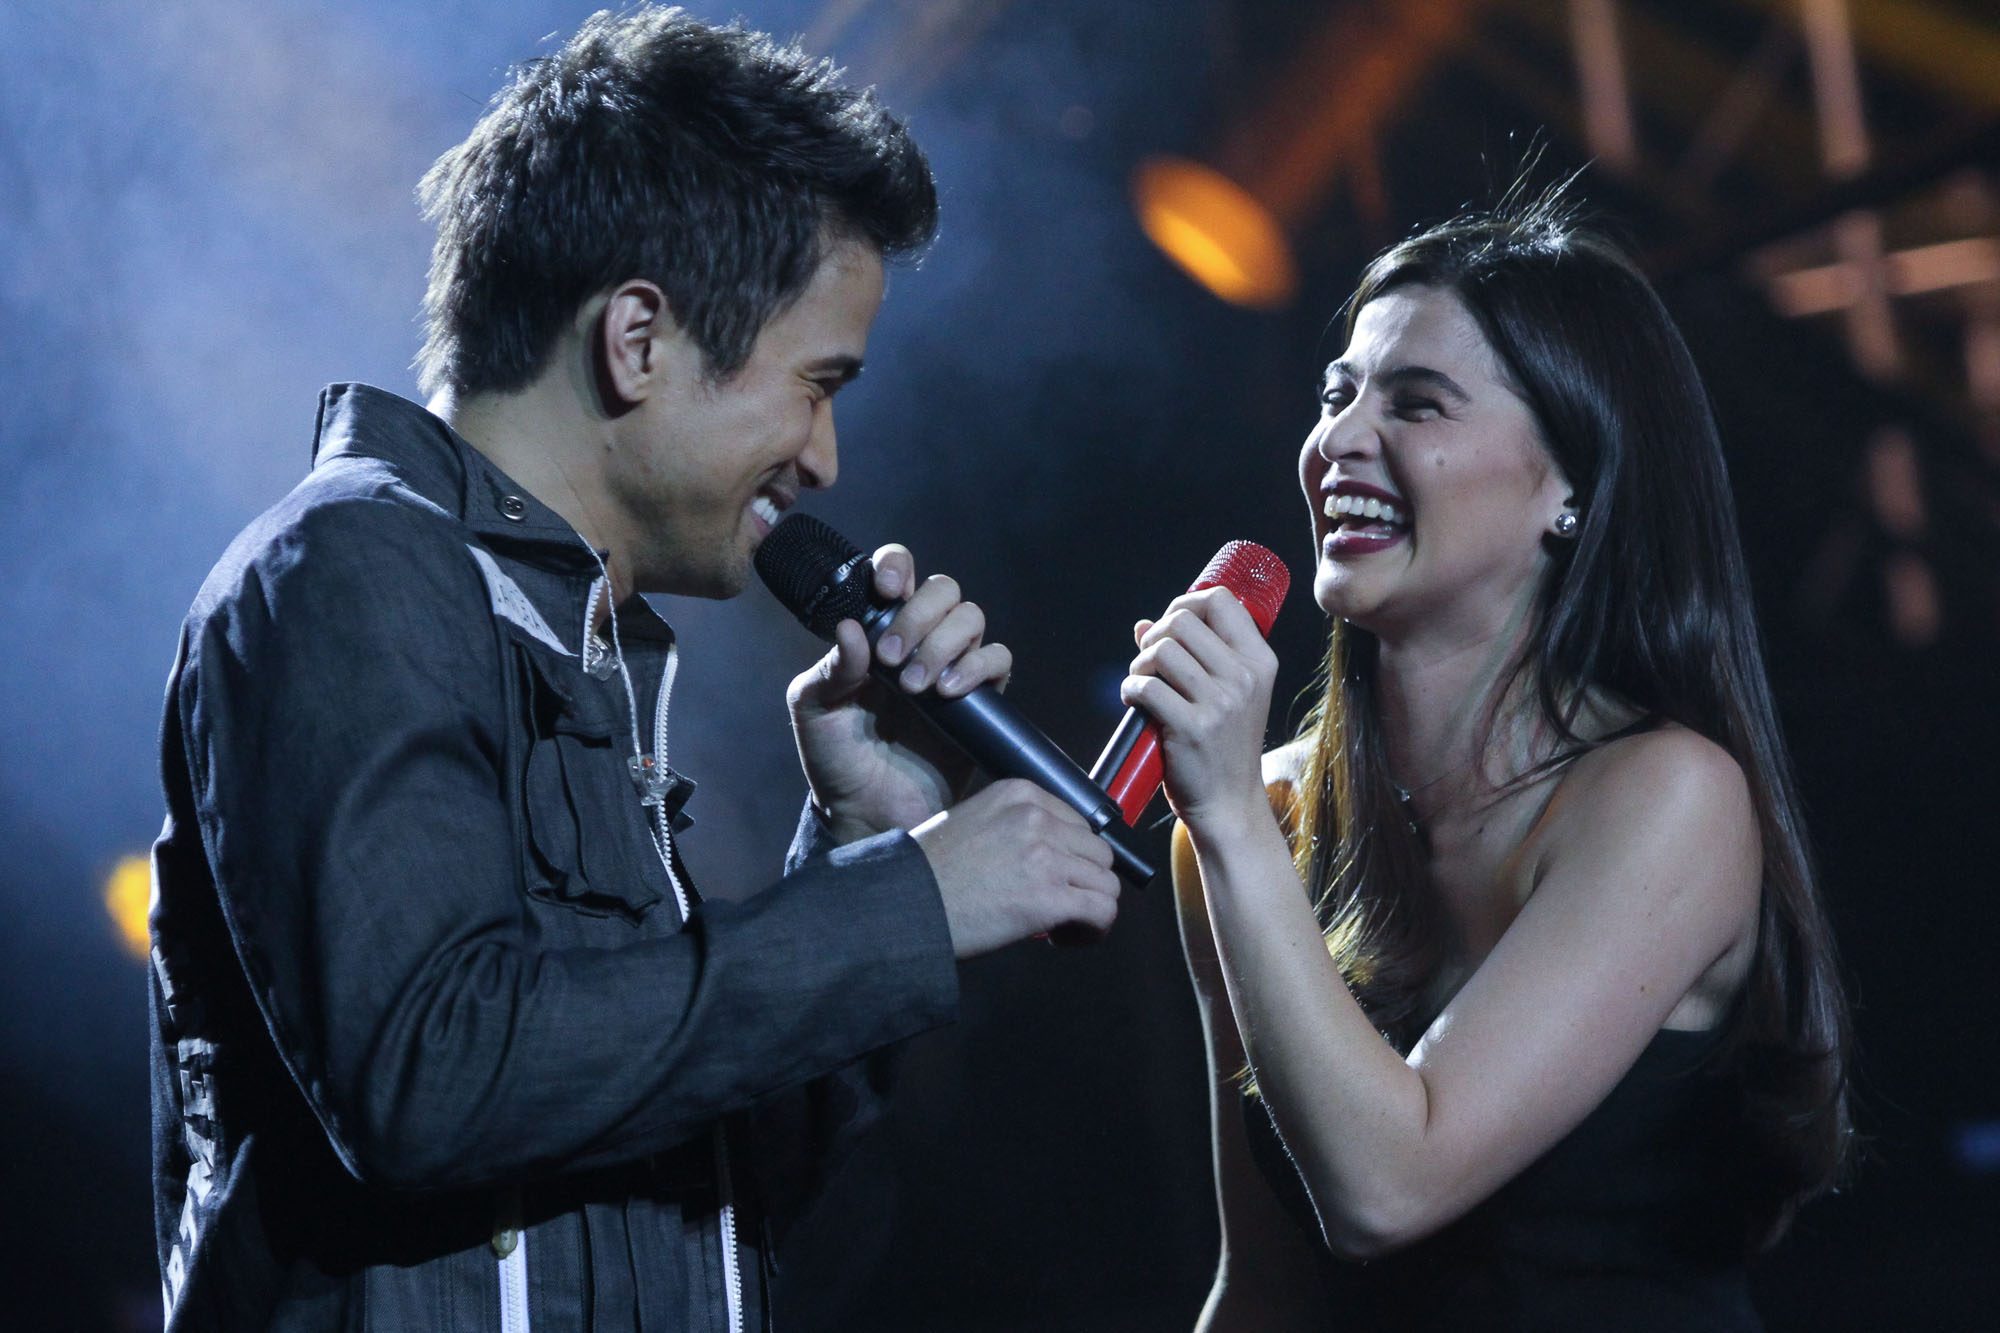 IN PHOTOS: Sam Milby’s ‘The Milby Way’ concert